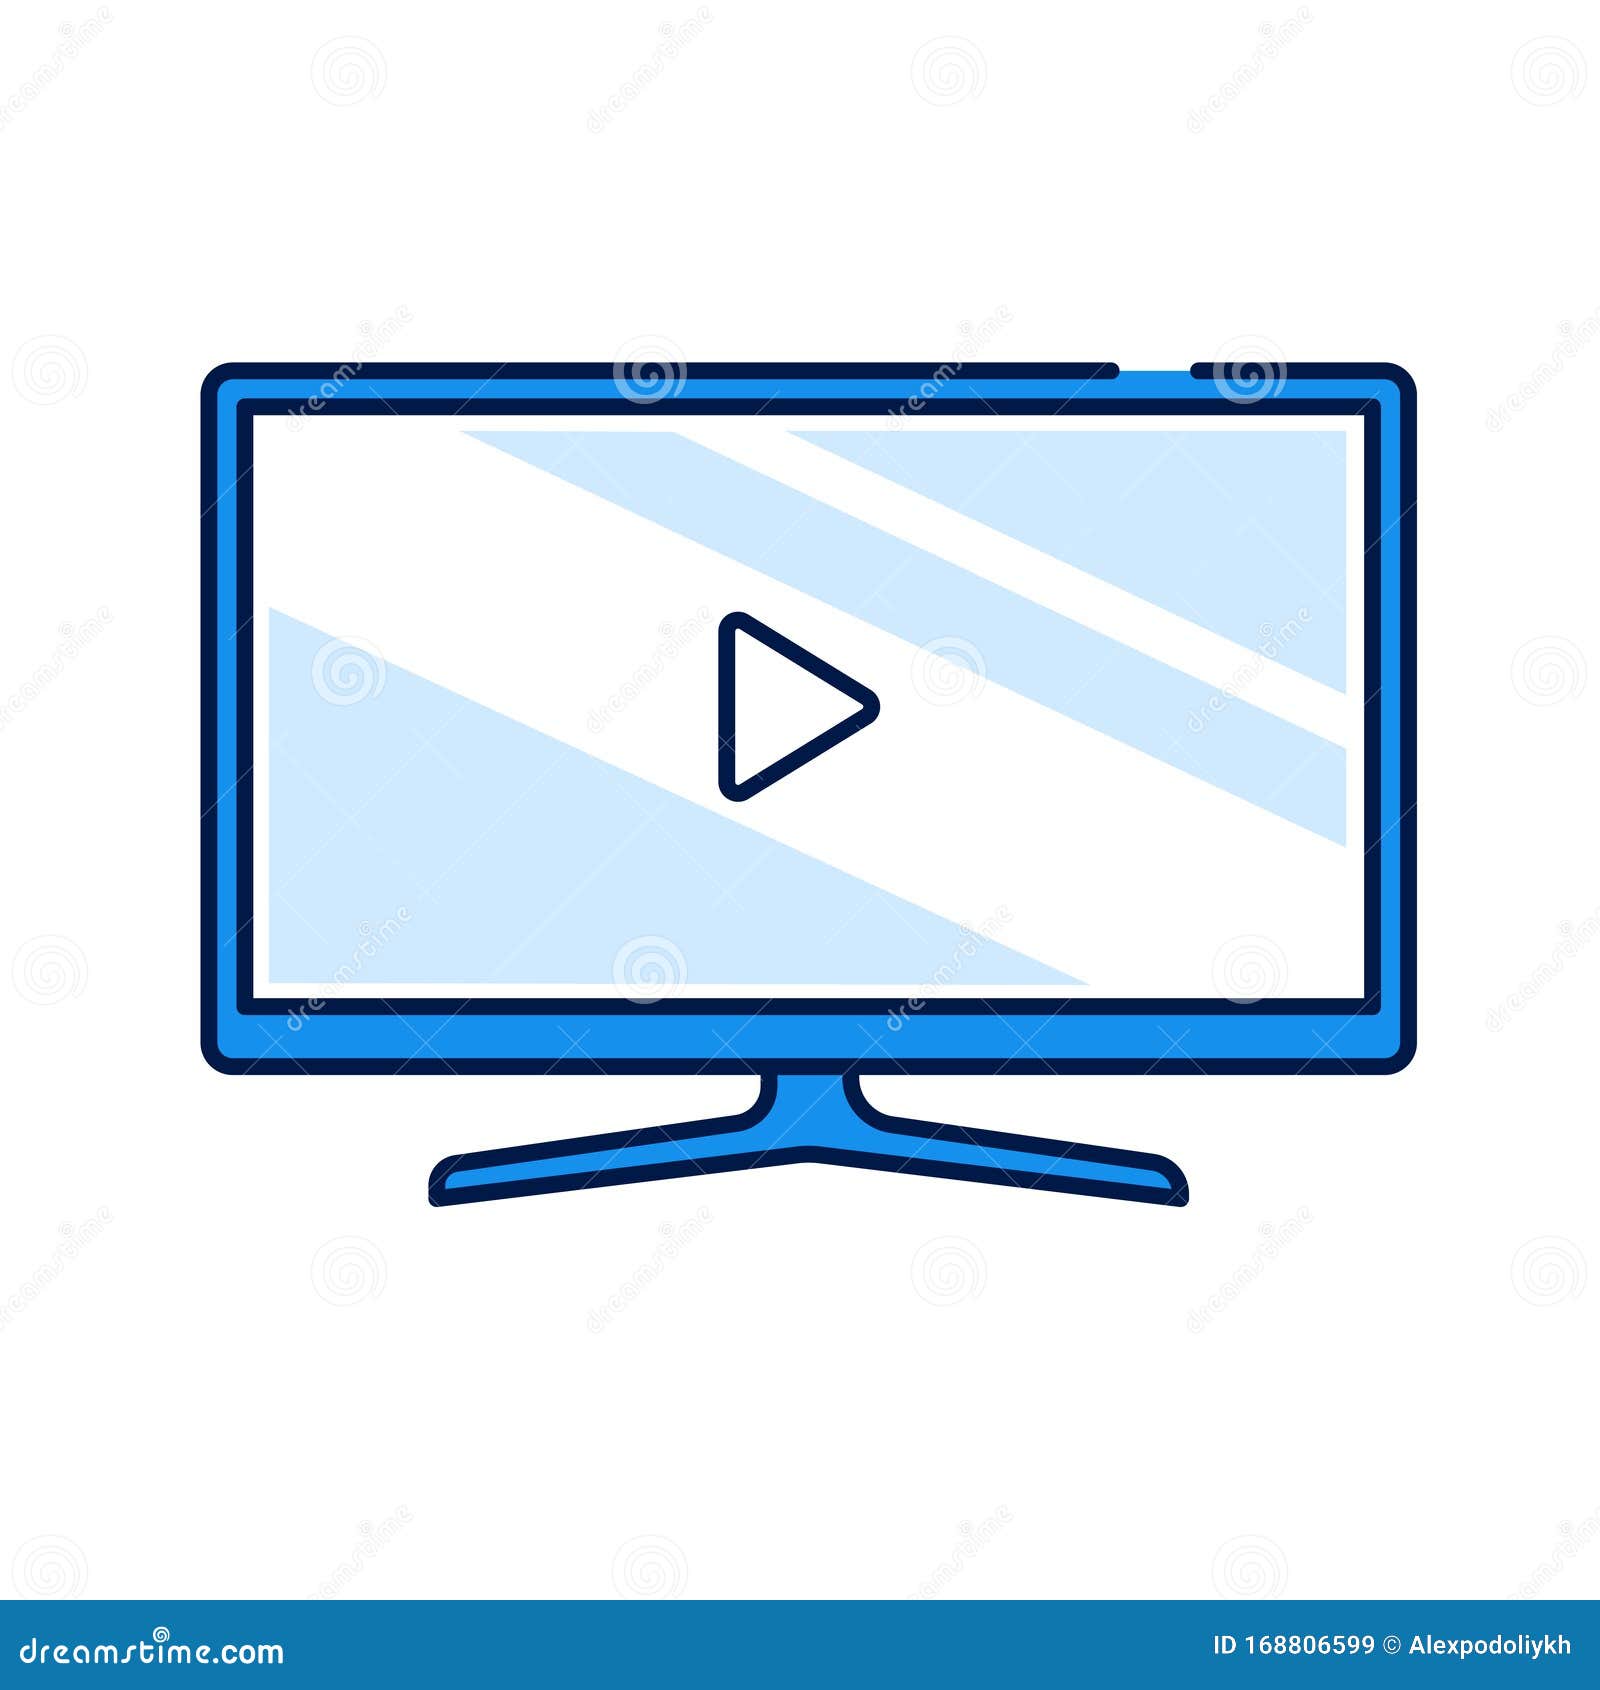 TV Display Color Line Icon. Watching a Movie or Video in High Resolution.  Pictogram for Web Page, Mobile App, Promo Stock Illustration - Illustration  of gadget, hdtv: 168806599